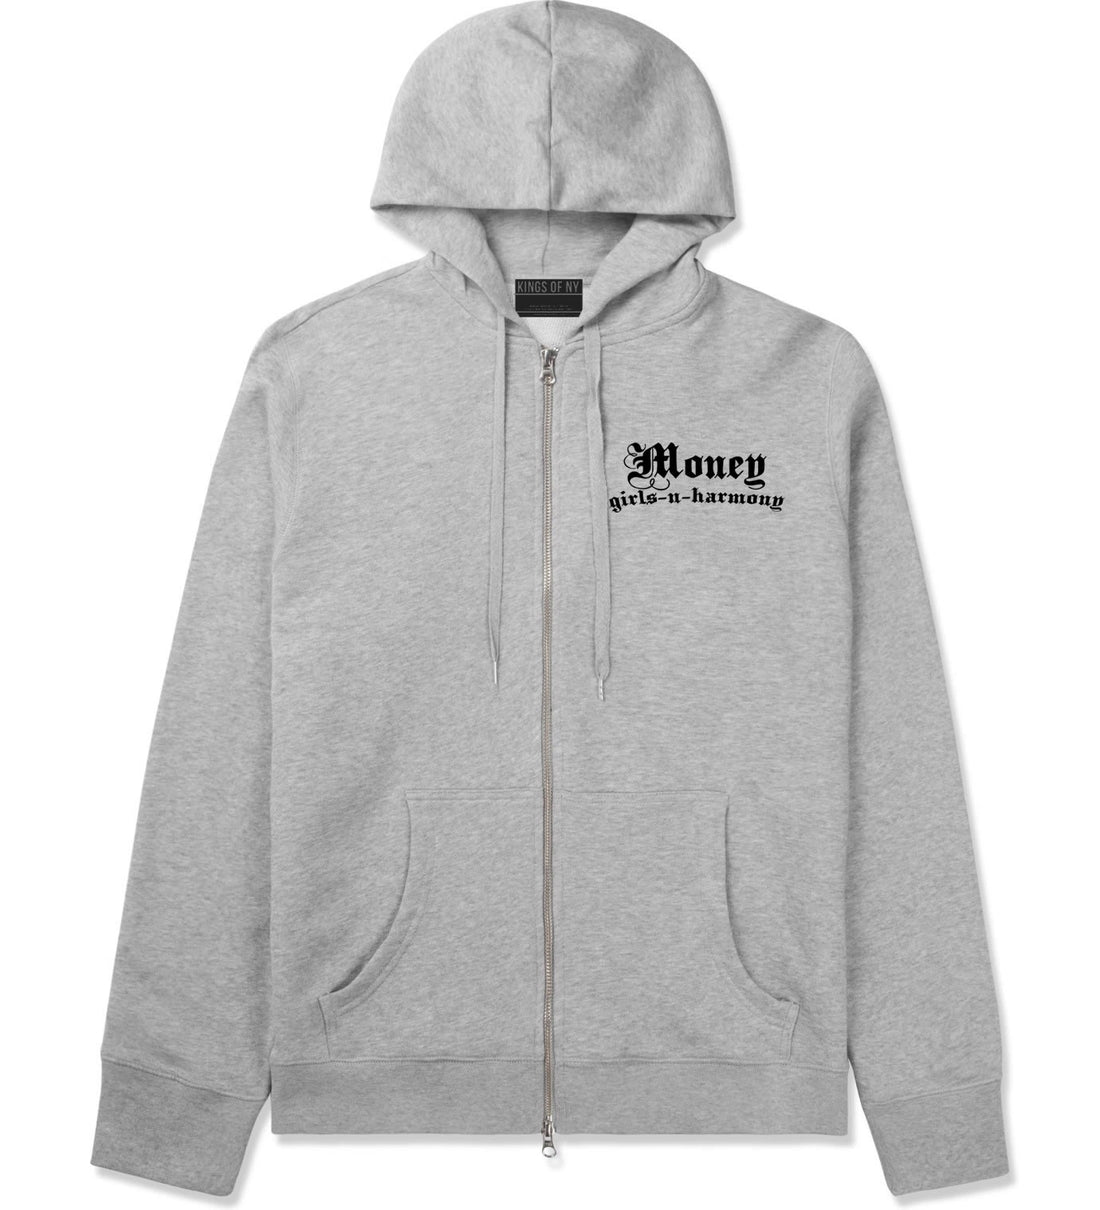 Money Girls And Harmony Zip Up Hoodie in Grey By Kings Of NY